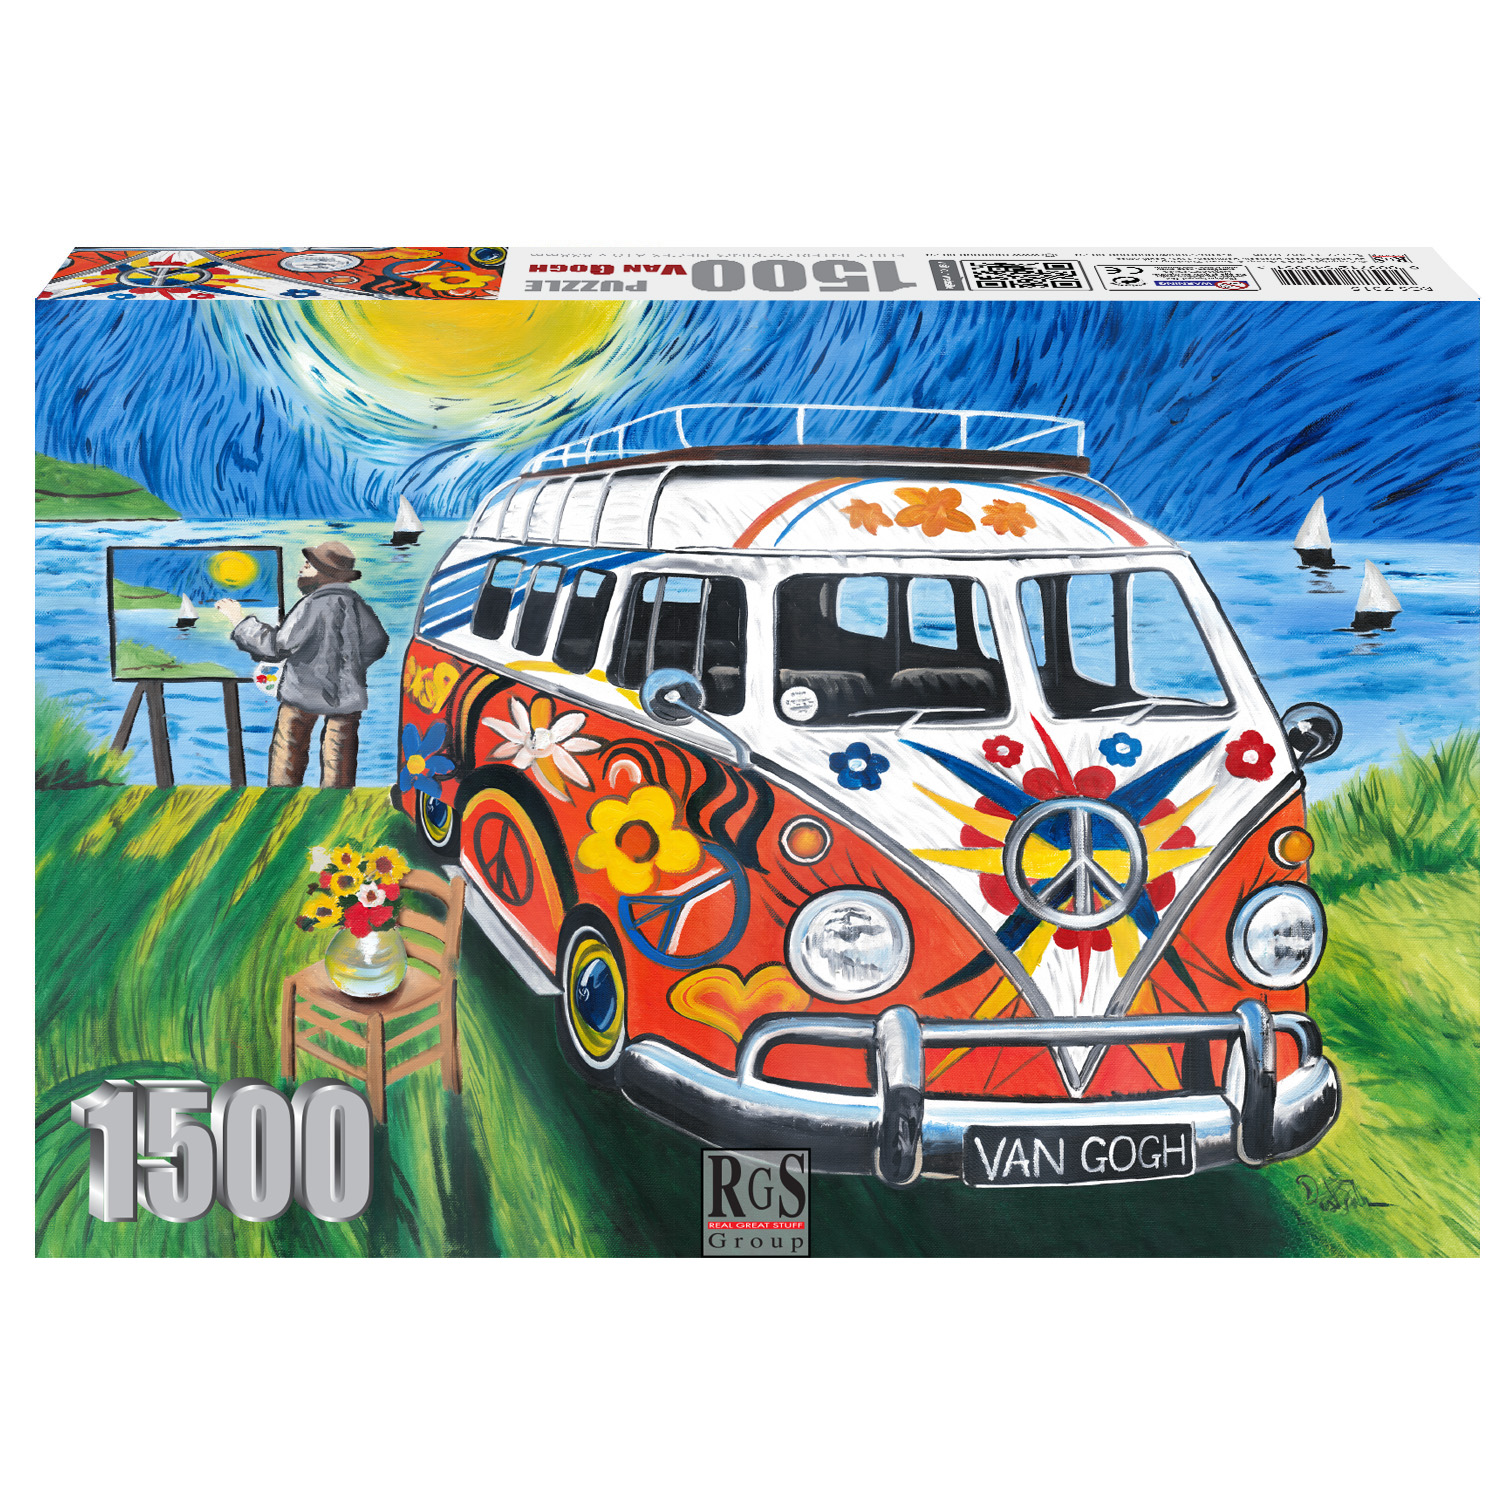 box of 1500pc puzzle in Ban Goghs art style